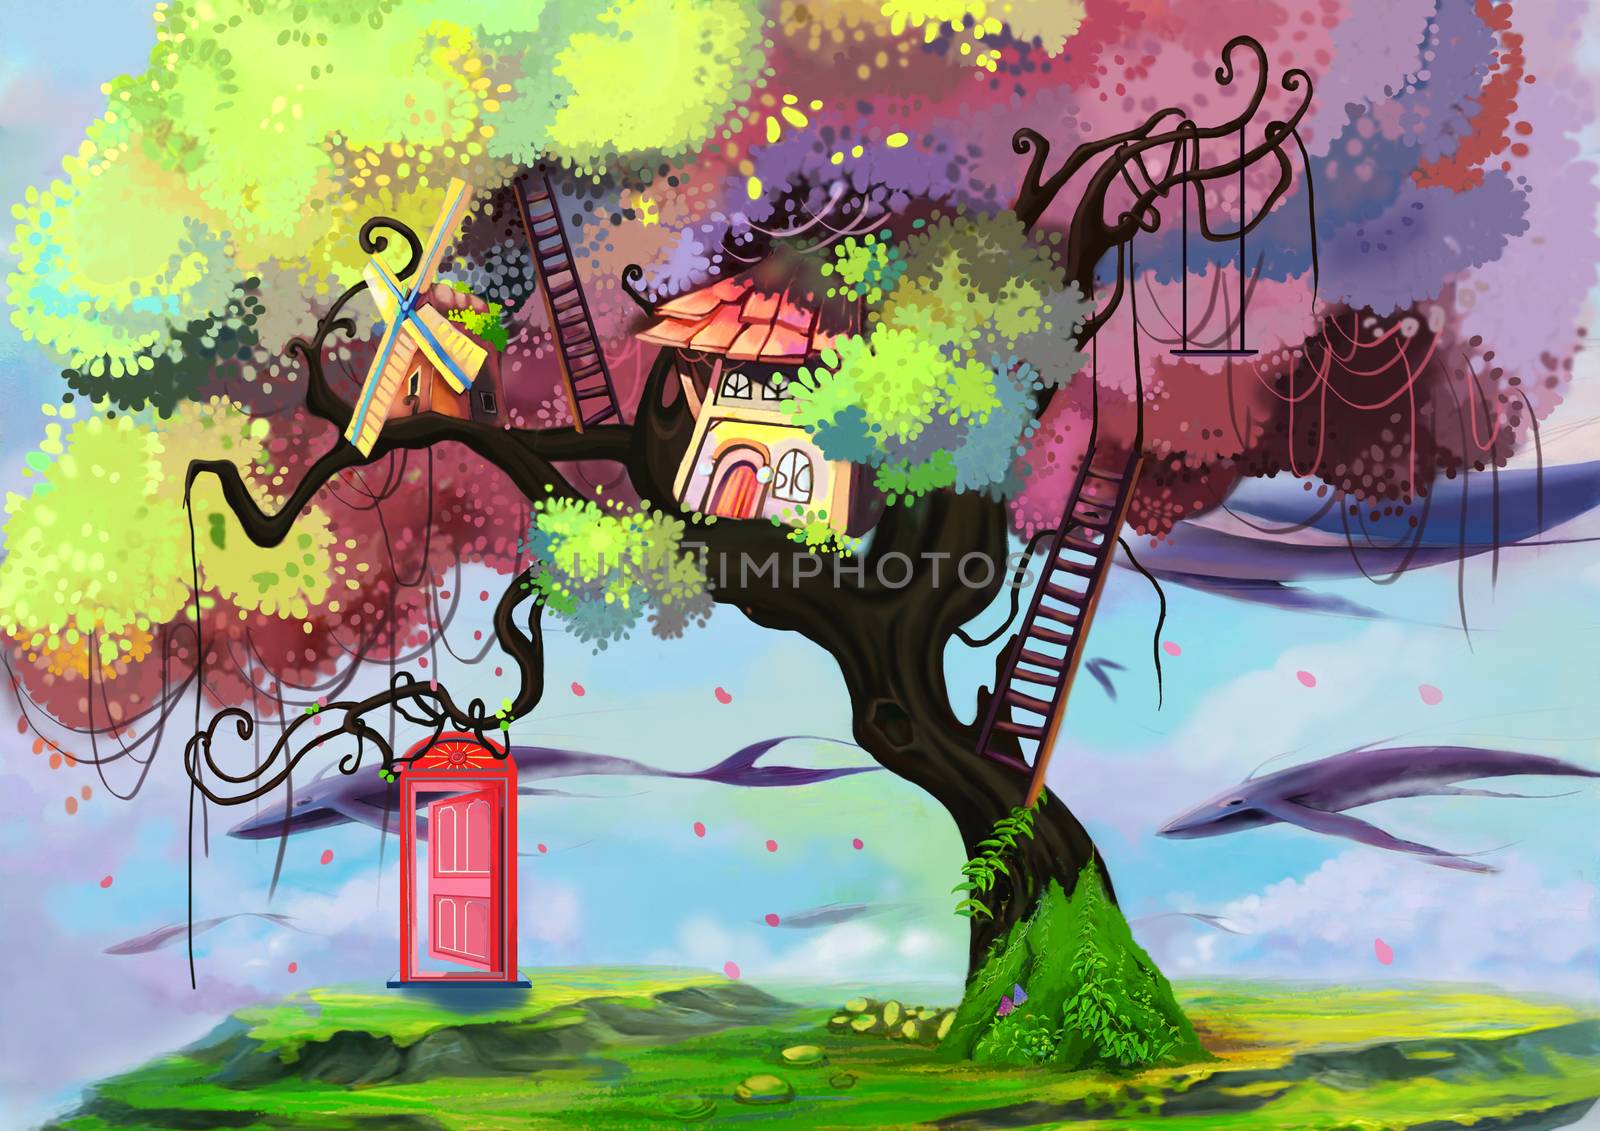 Illustration: The Memory Gate / Door. The Tree House. The Floating Island. The Flying Great White Whale. Fantastic Cartoon Style Wallpaper Background Scene Design with Story. by NextMars